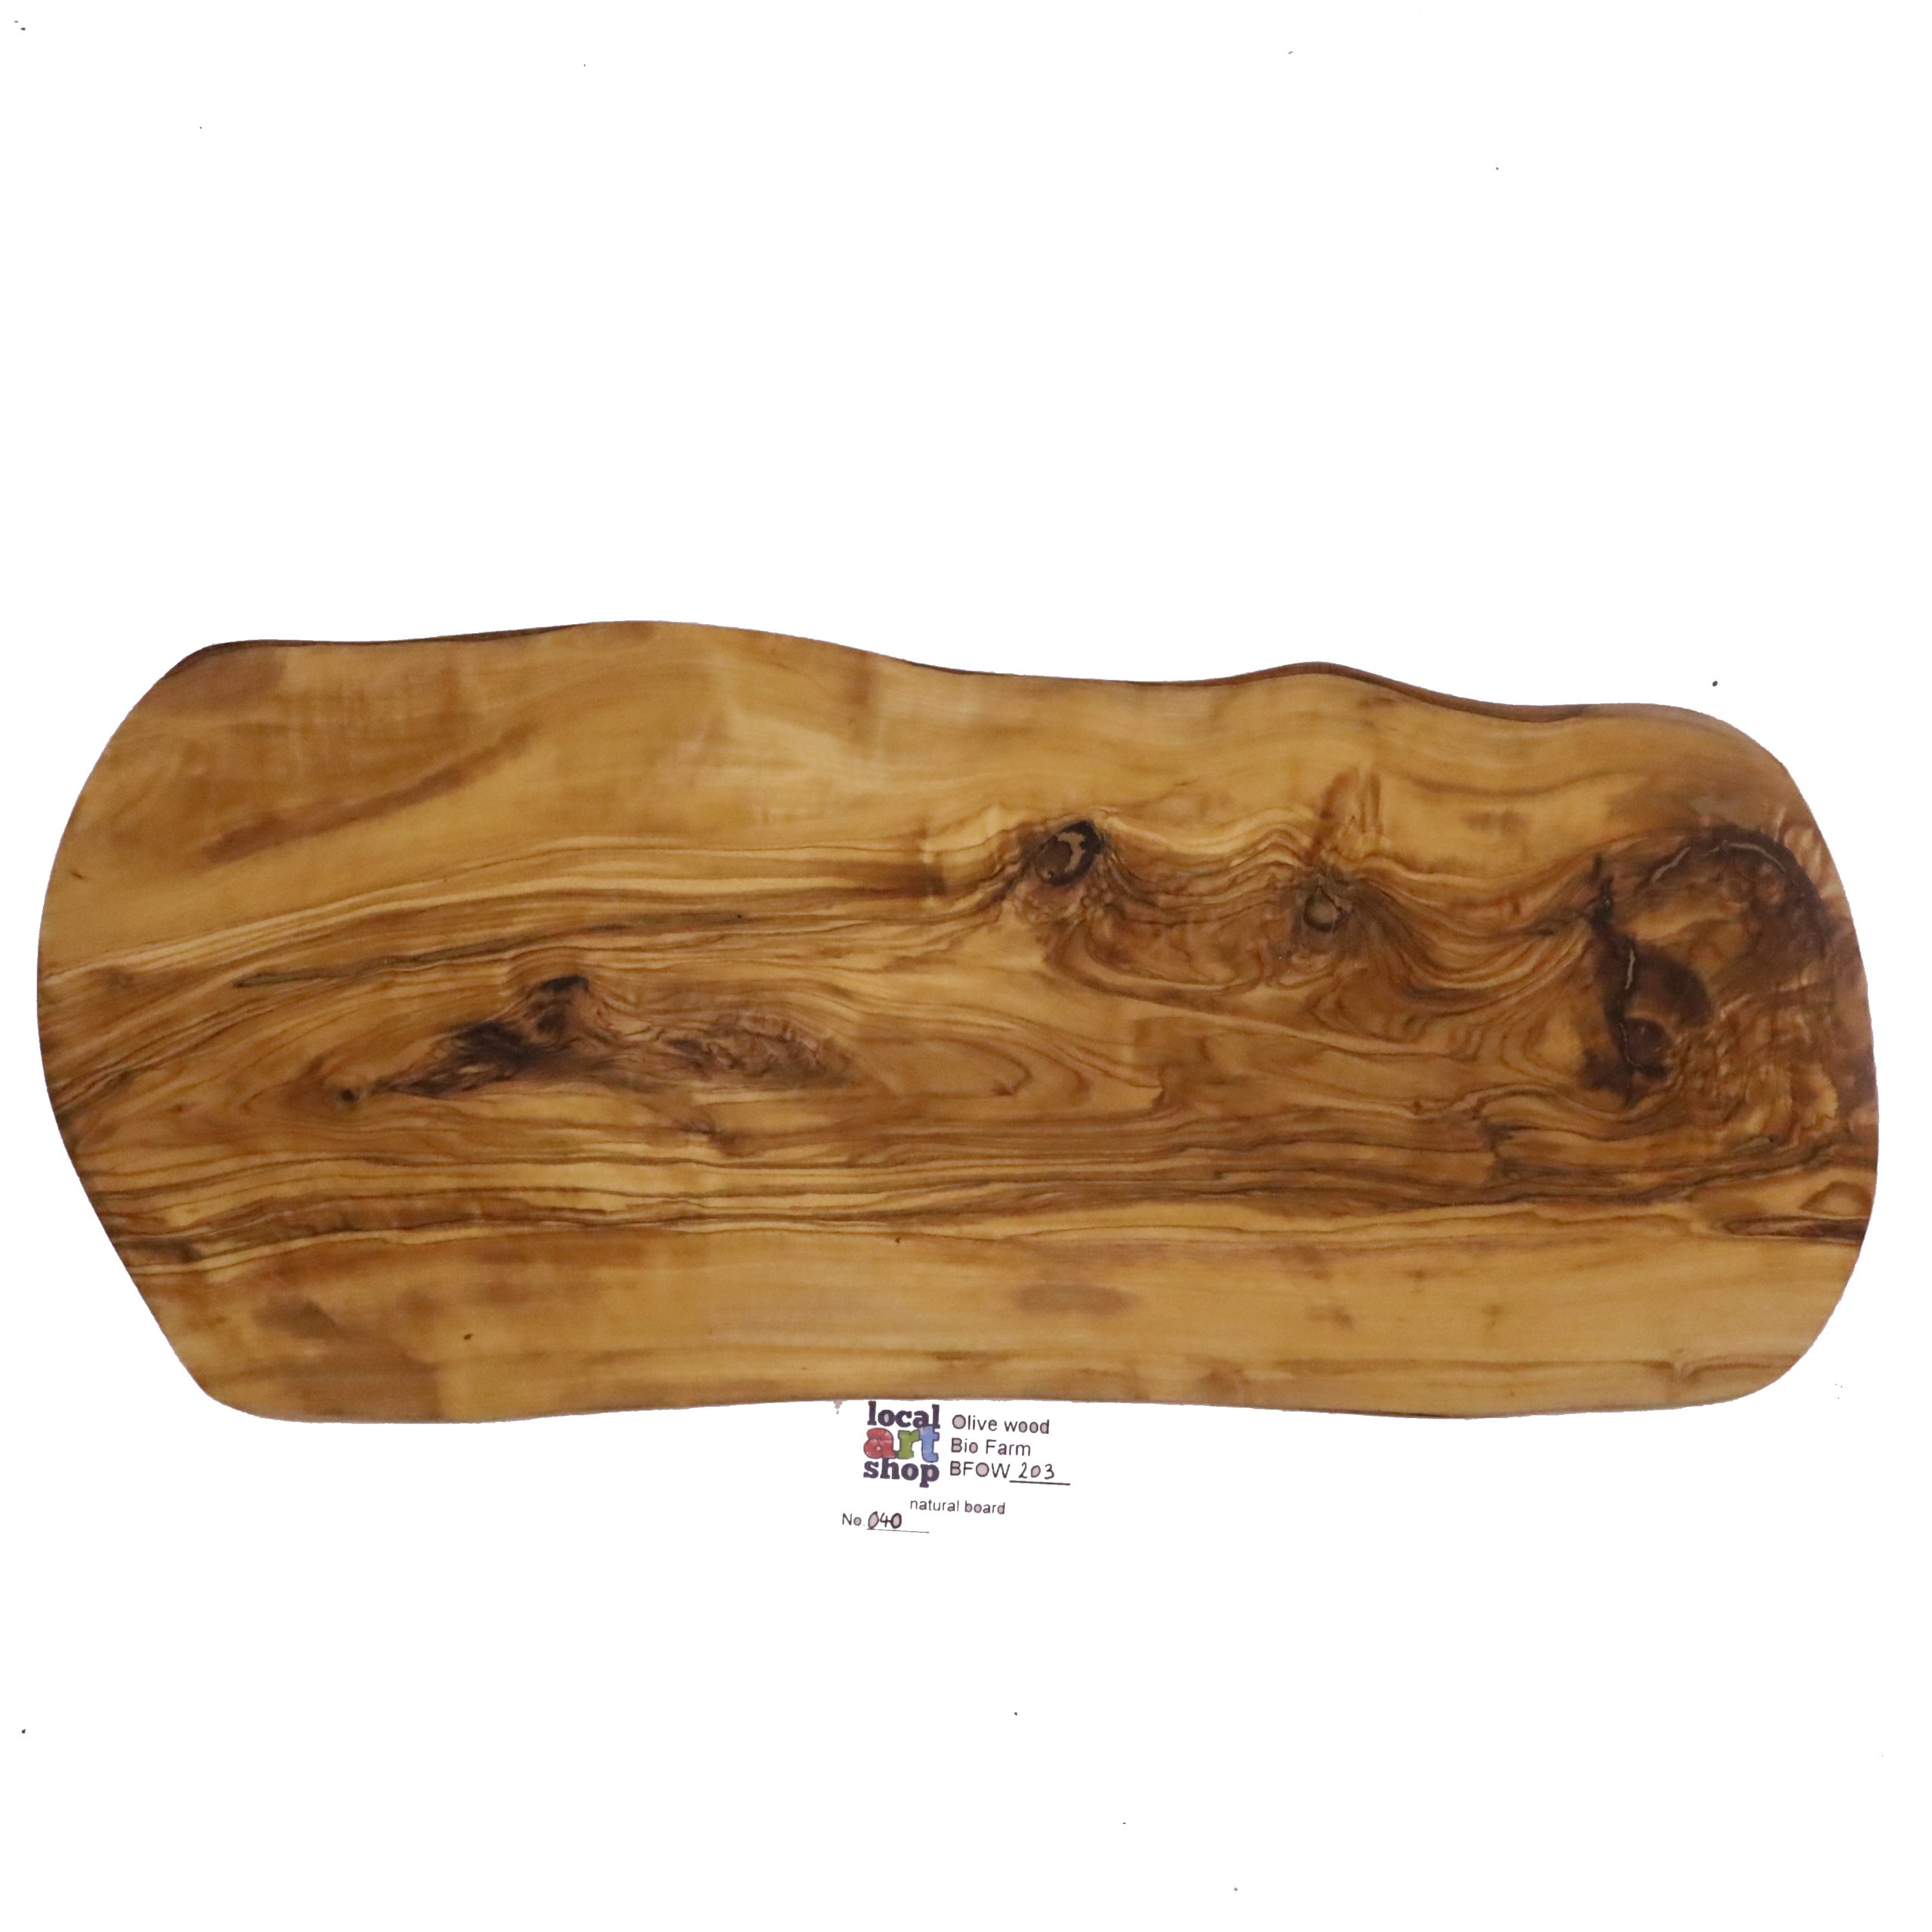 Olive wood natural chopping service board standard 44 cm to 48 cm long